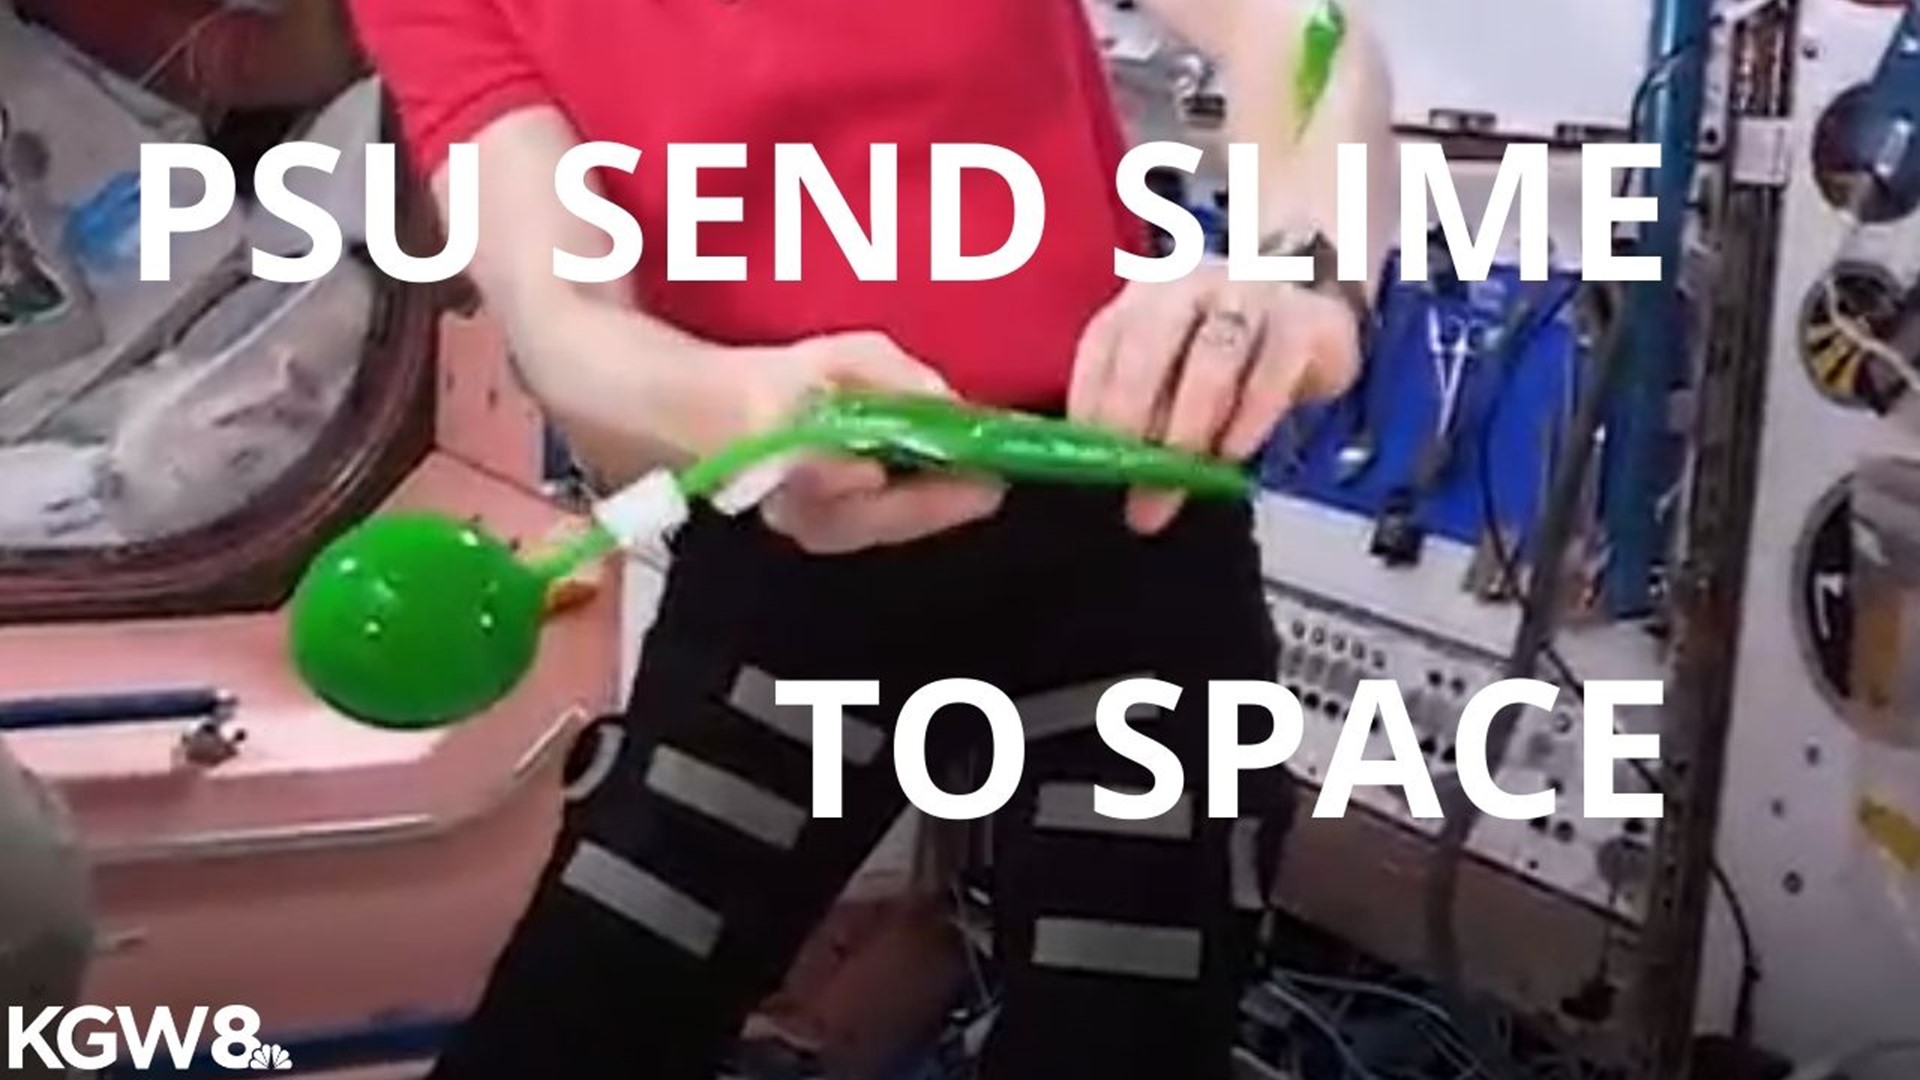 Sending slime into outer space. How PSU researchers made it happen.